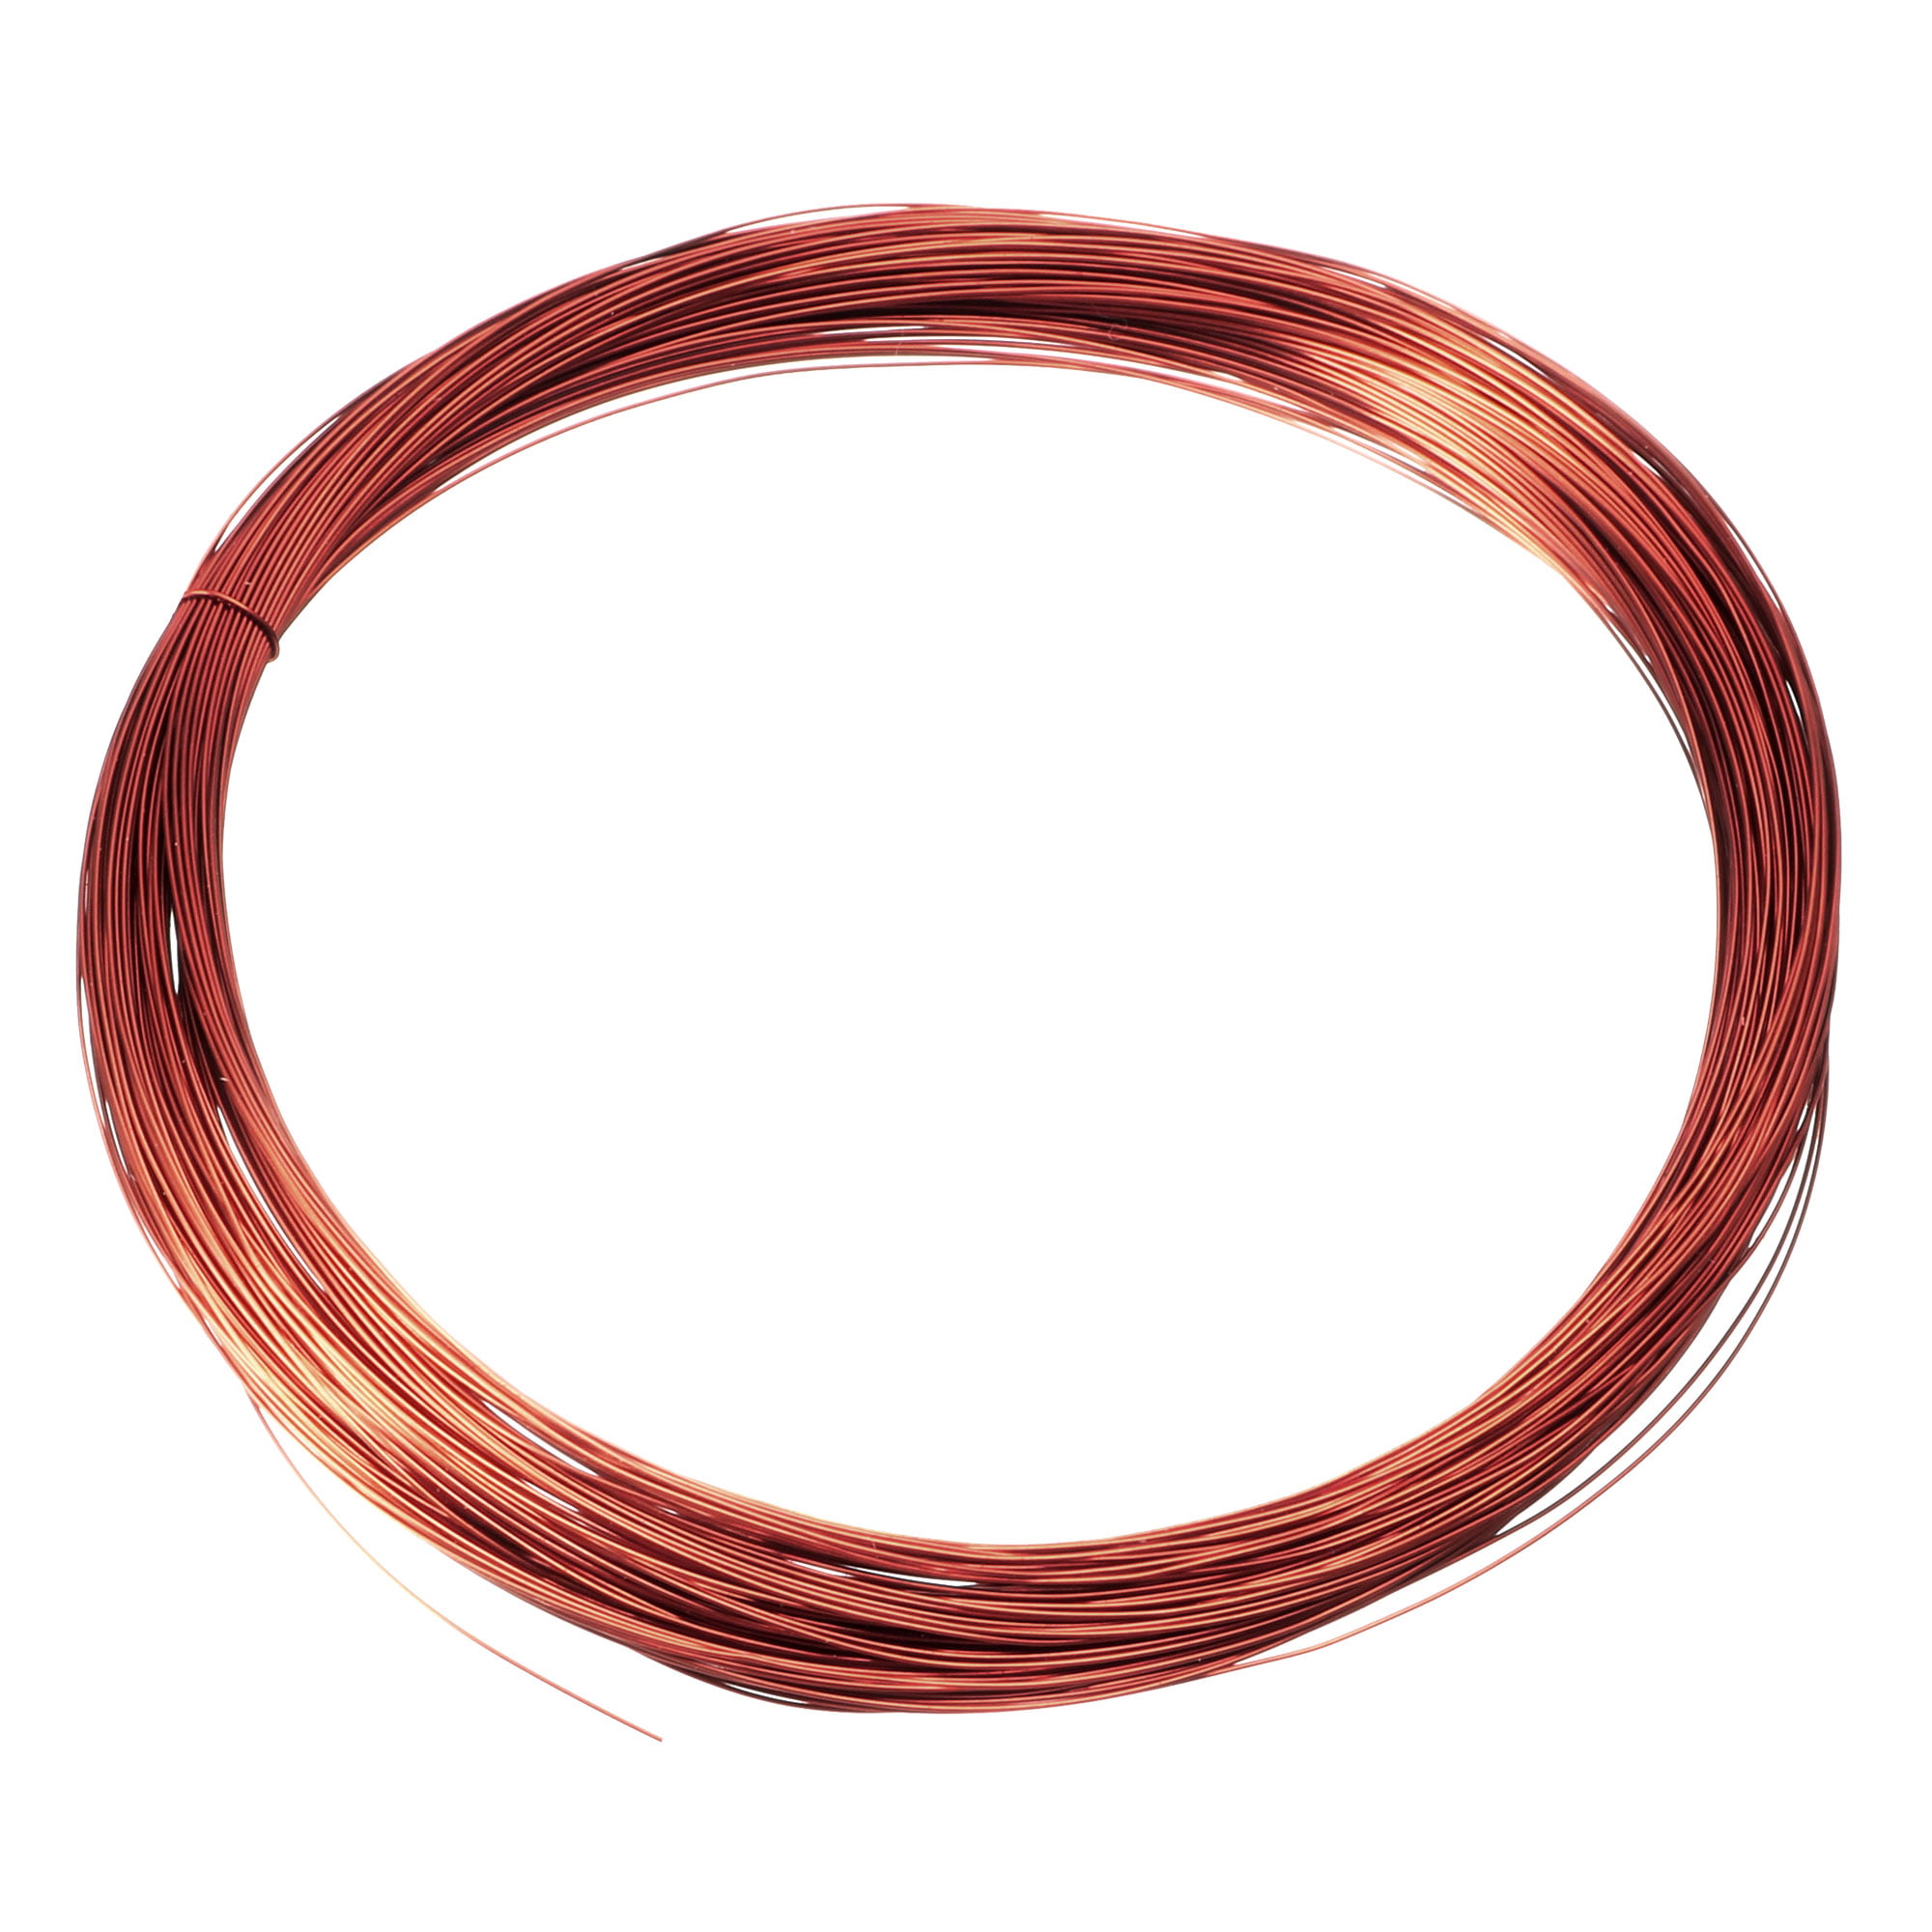 Magnet Wire 12 Gauge AWG Enameled Copper 100 Feet Coil Winding Heavy Build Red 